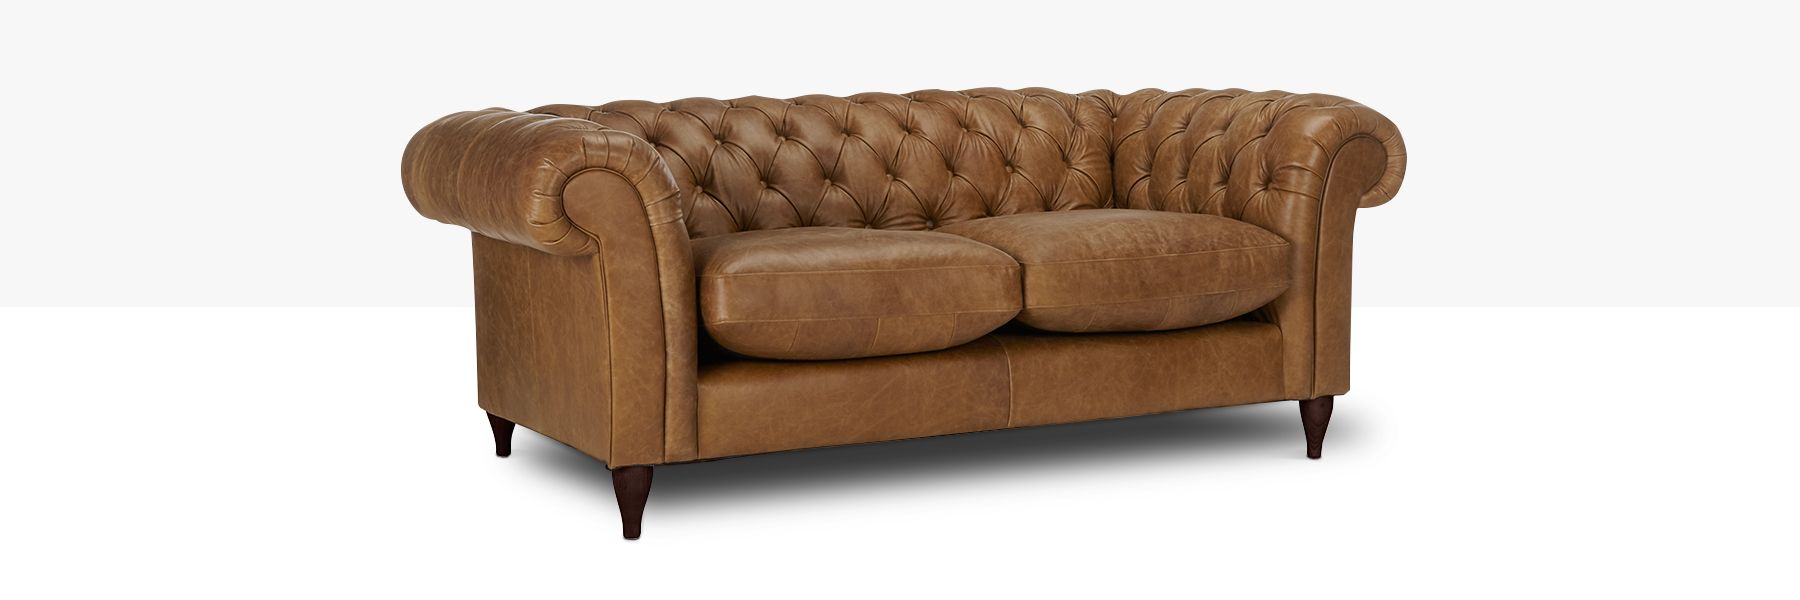 chesterfield style sofas are available at john lewis